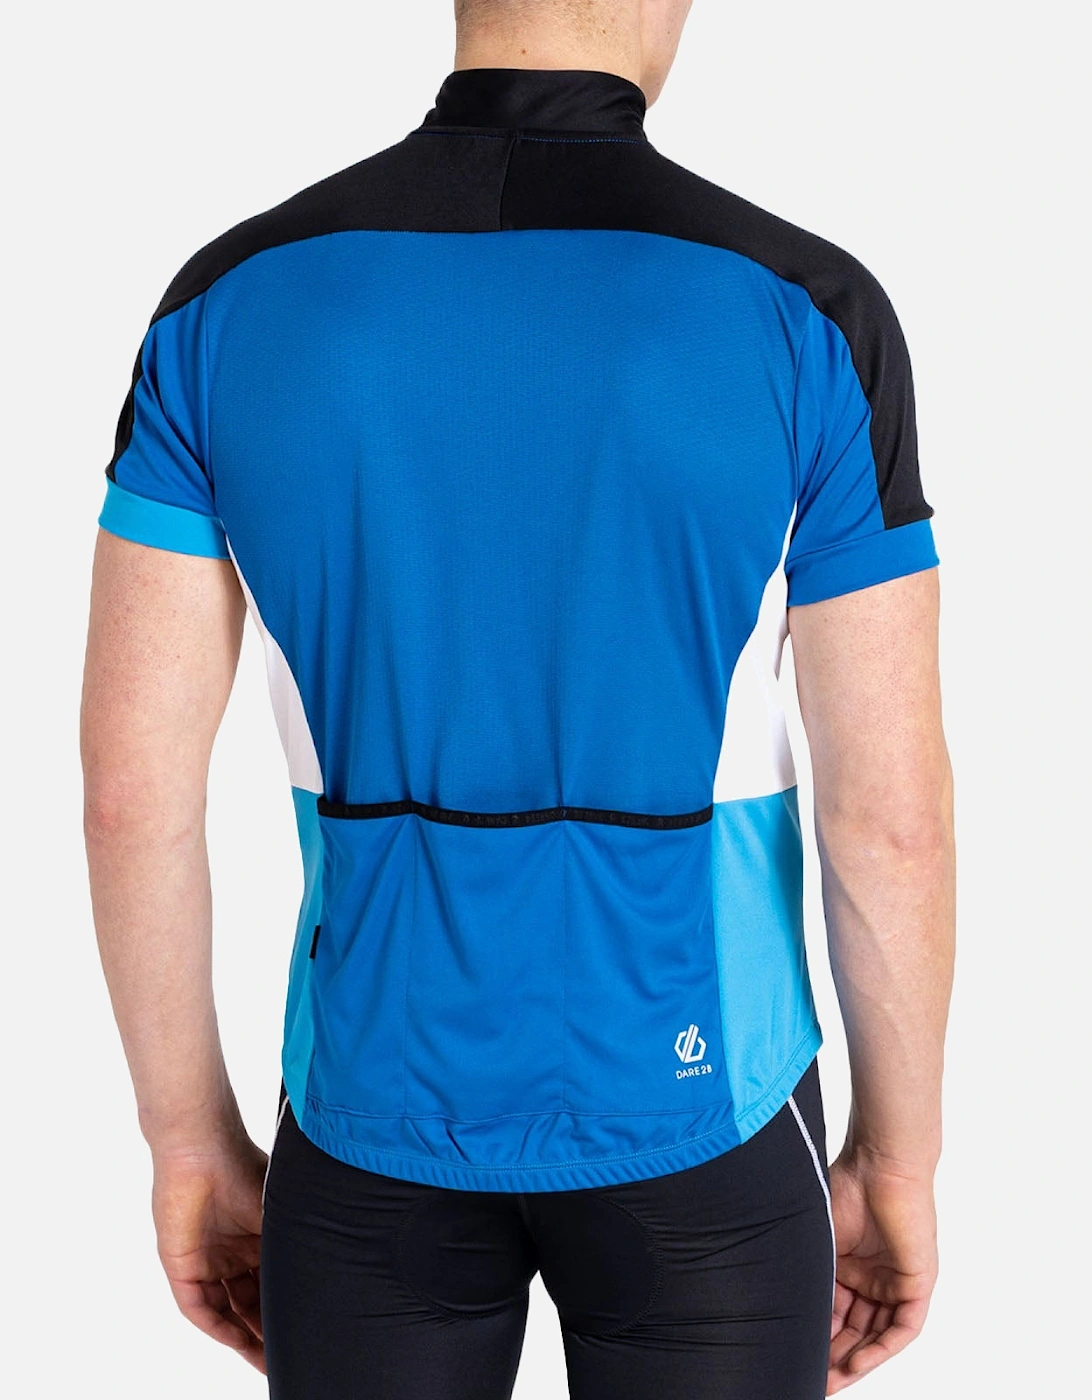 Mens Protraction II Reflective Cycling Jersey - Blue